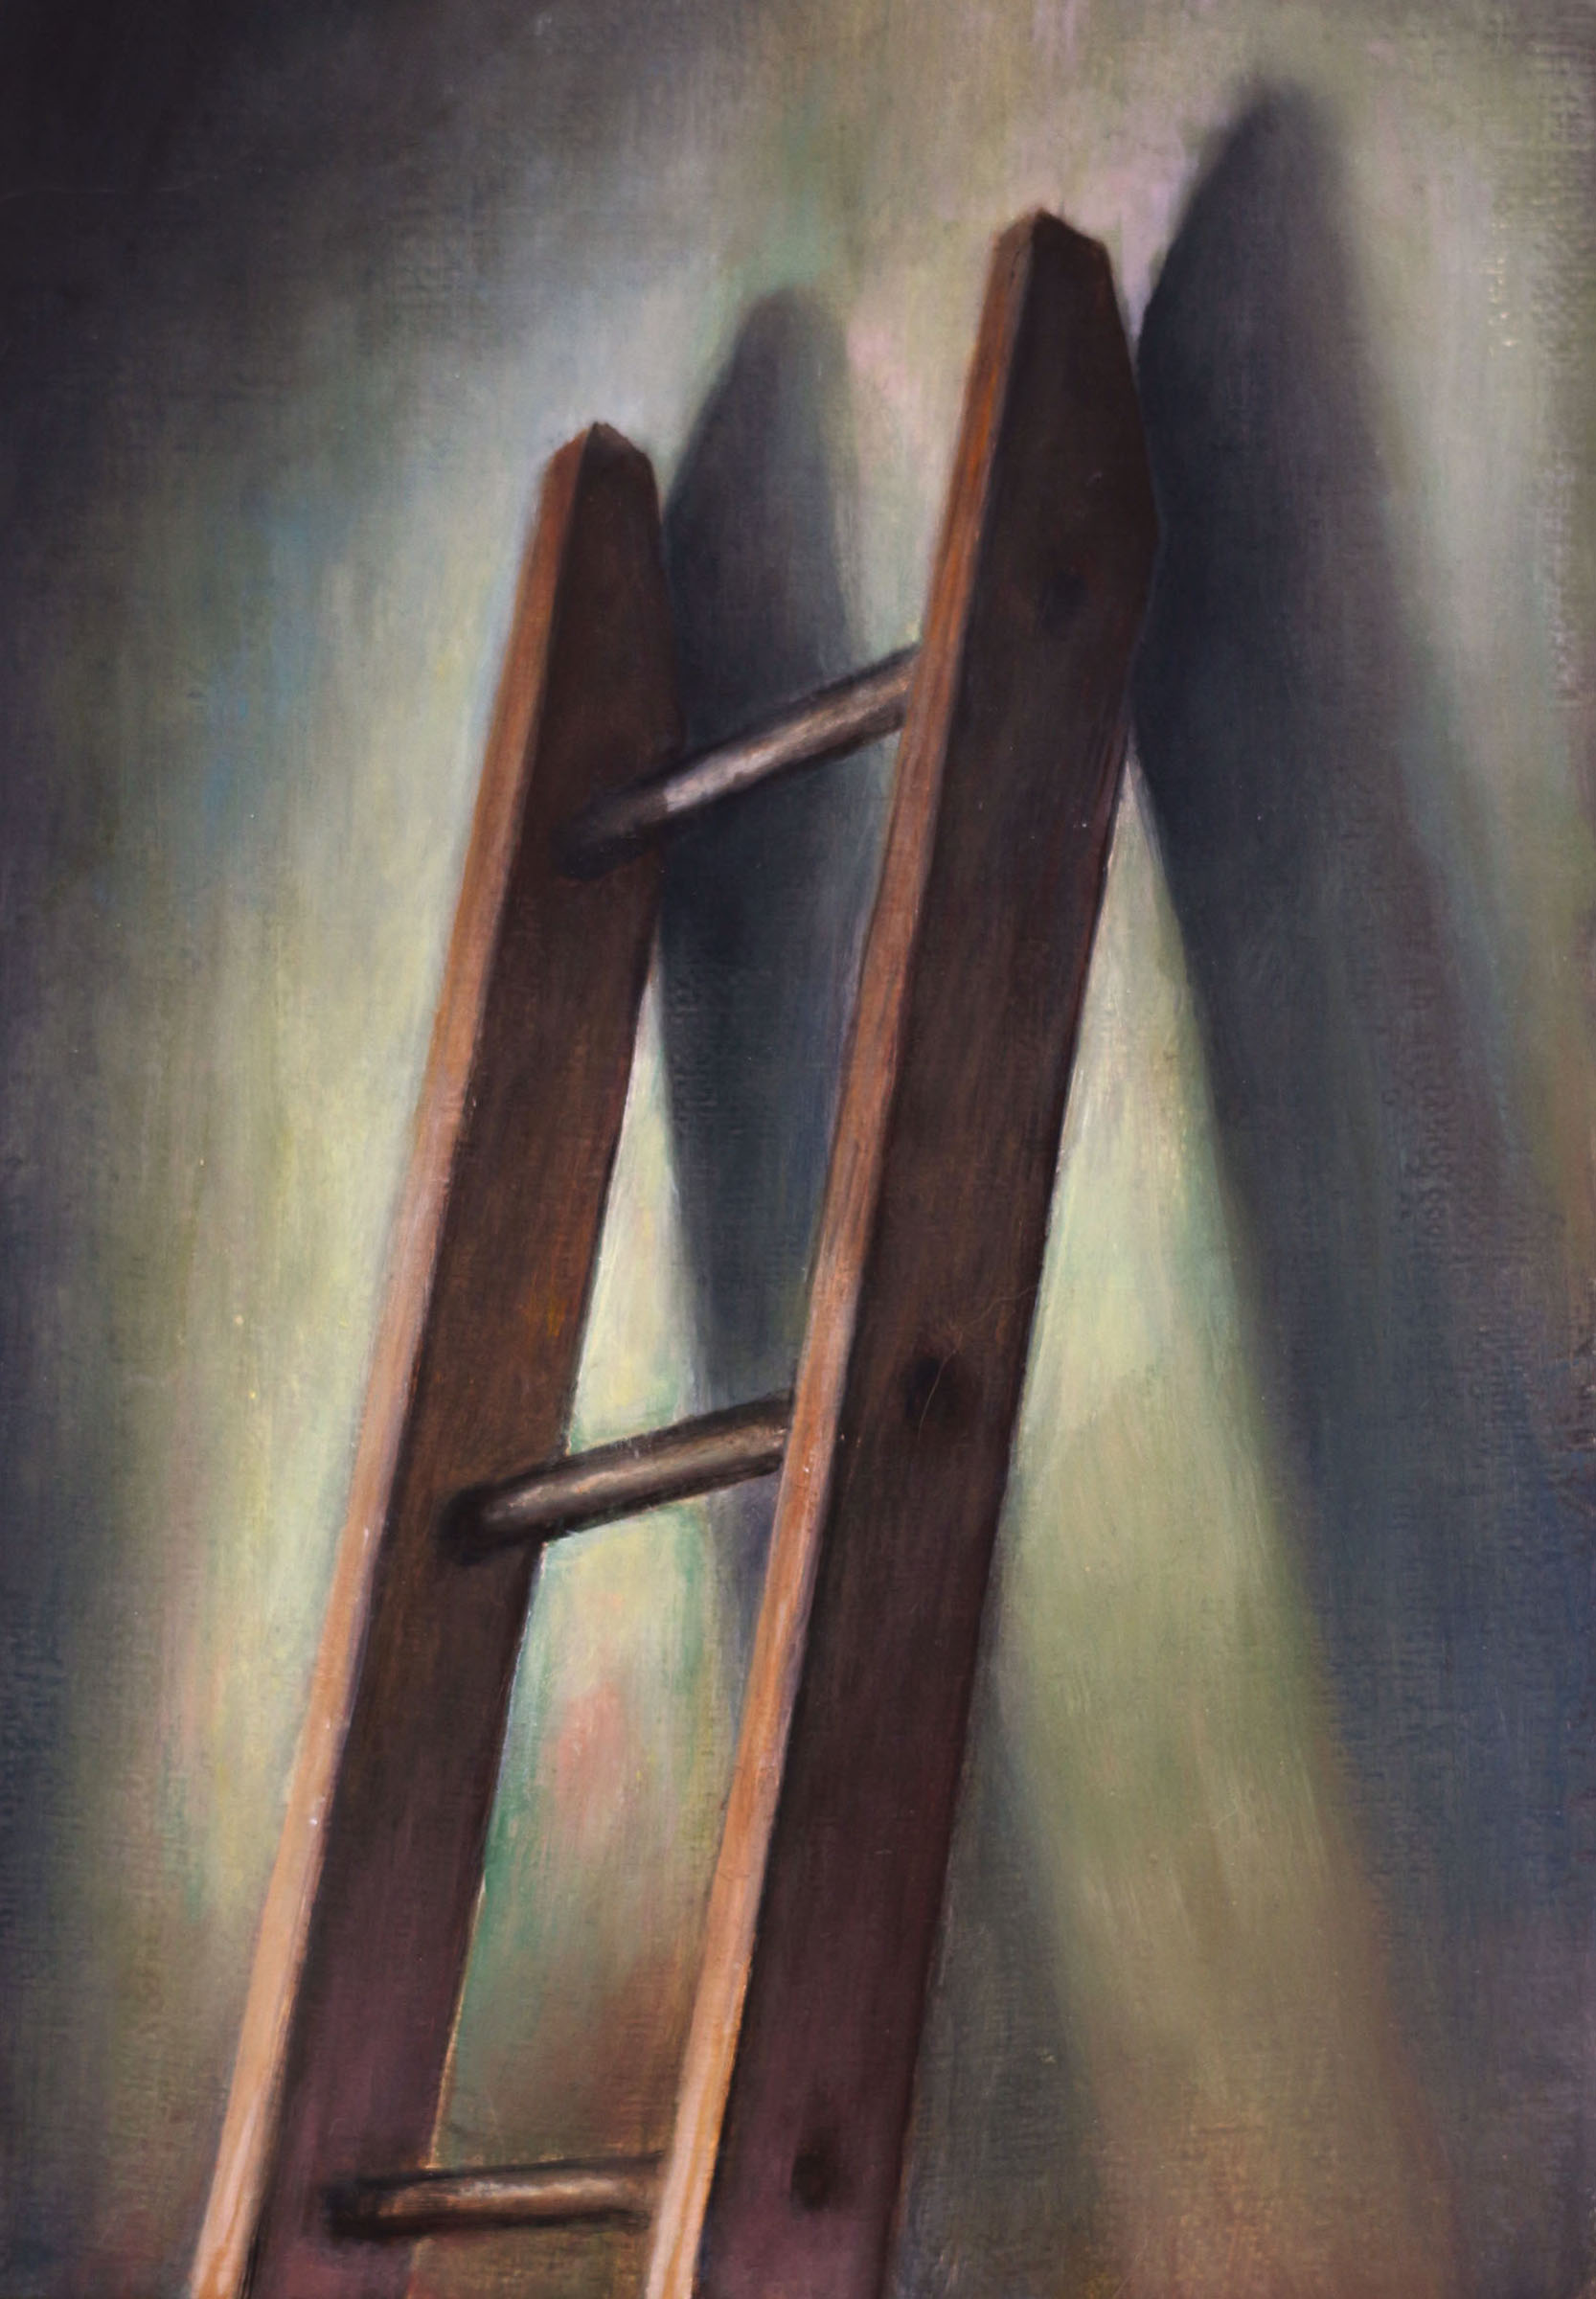   Ladder   2017  Oil on linen  7 x 5 inches       